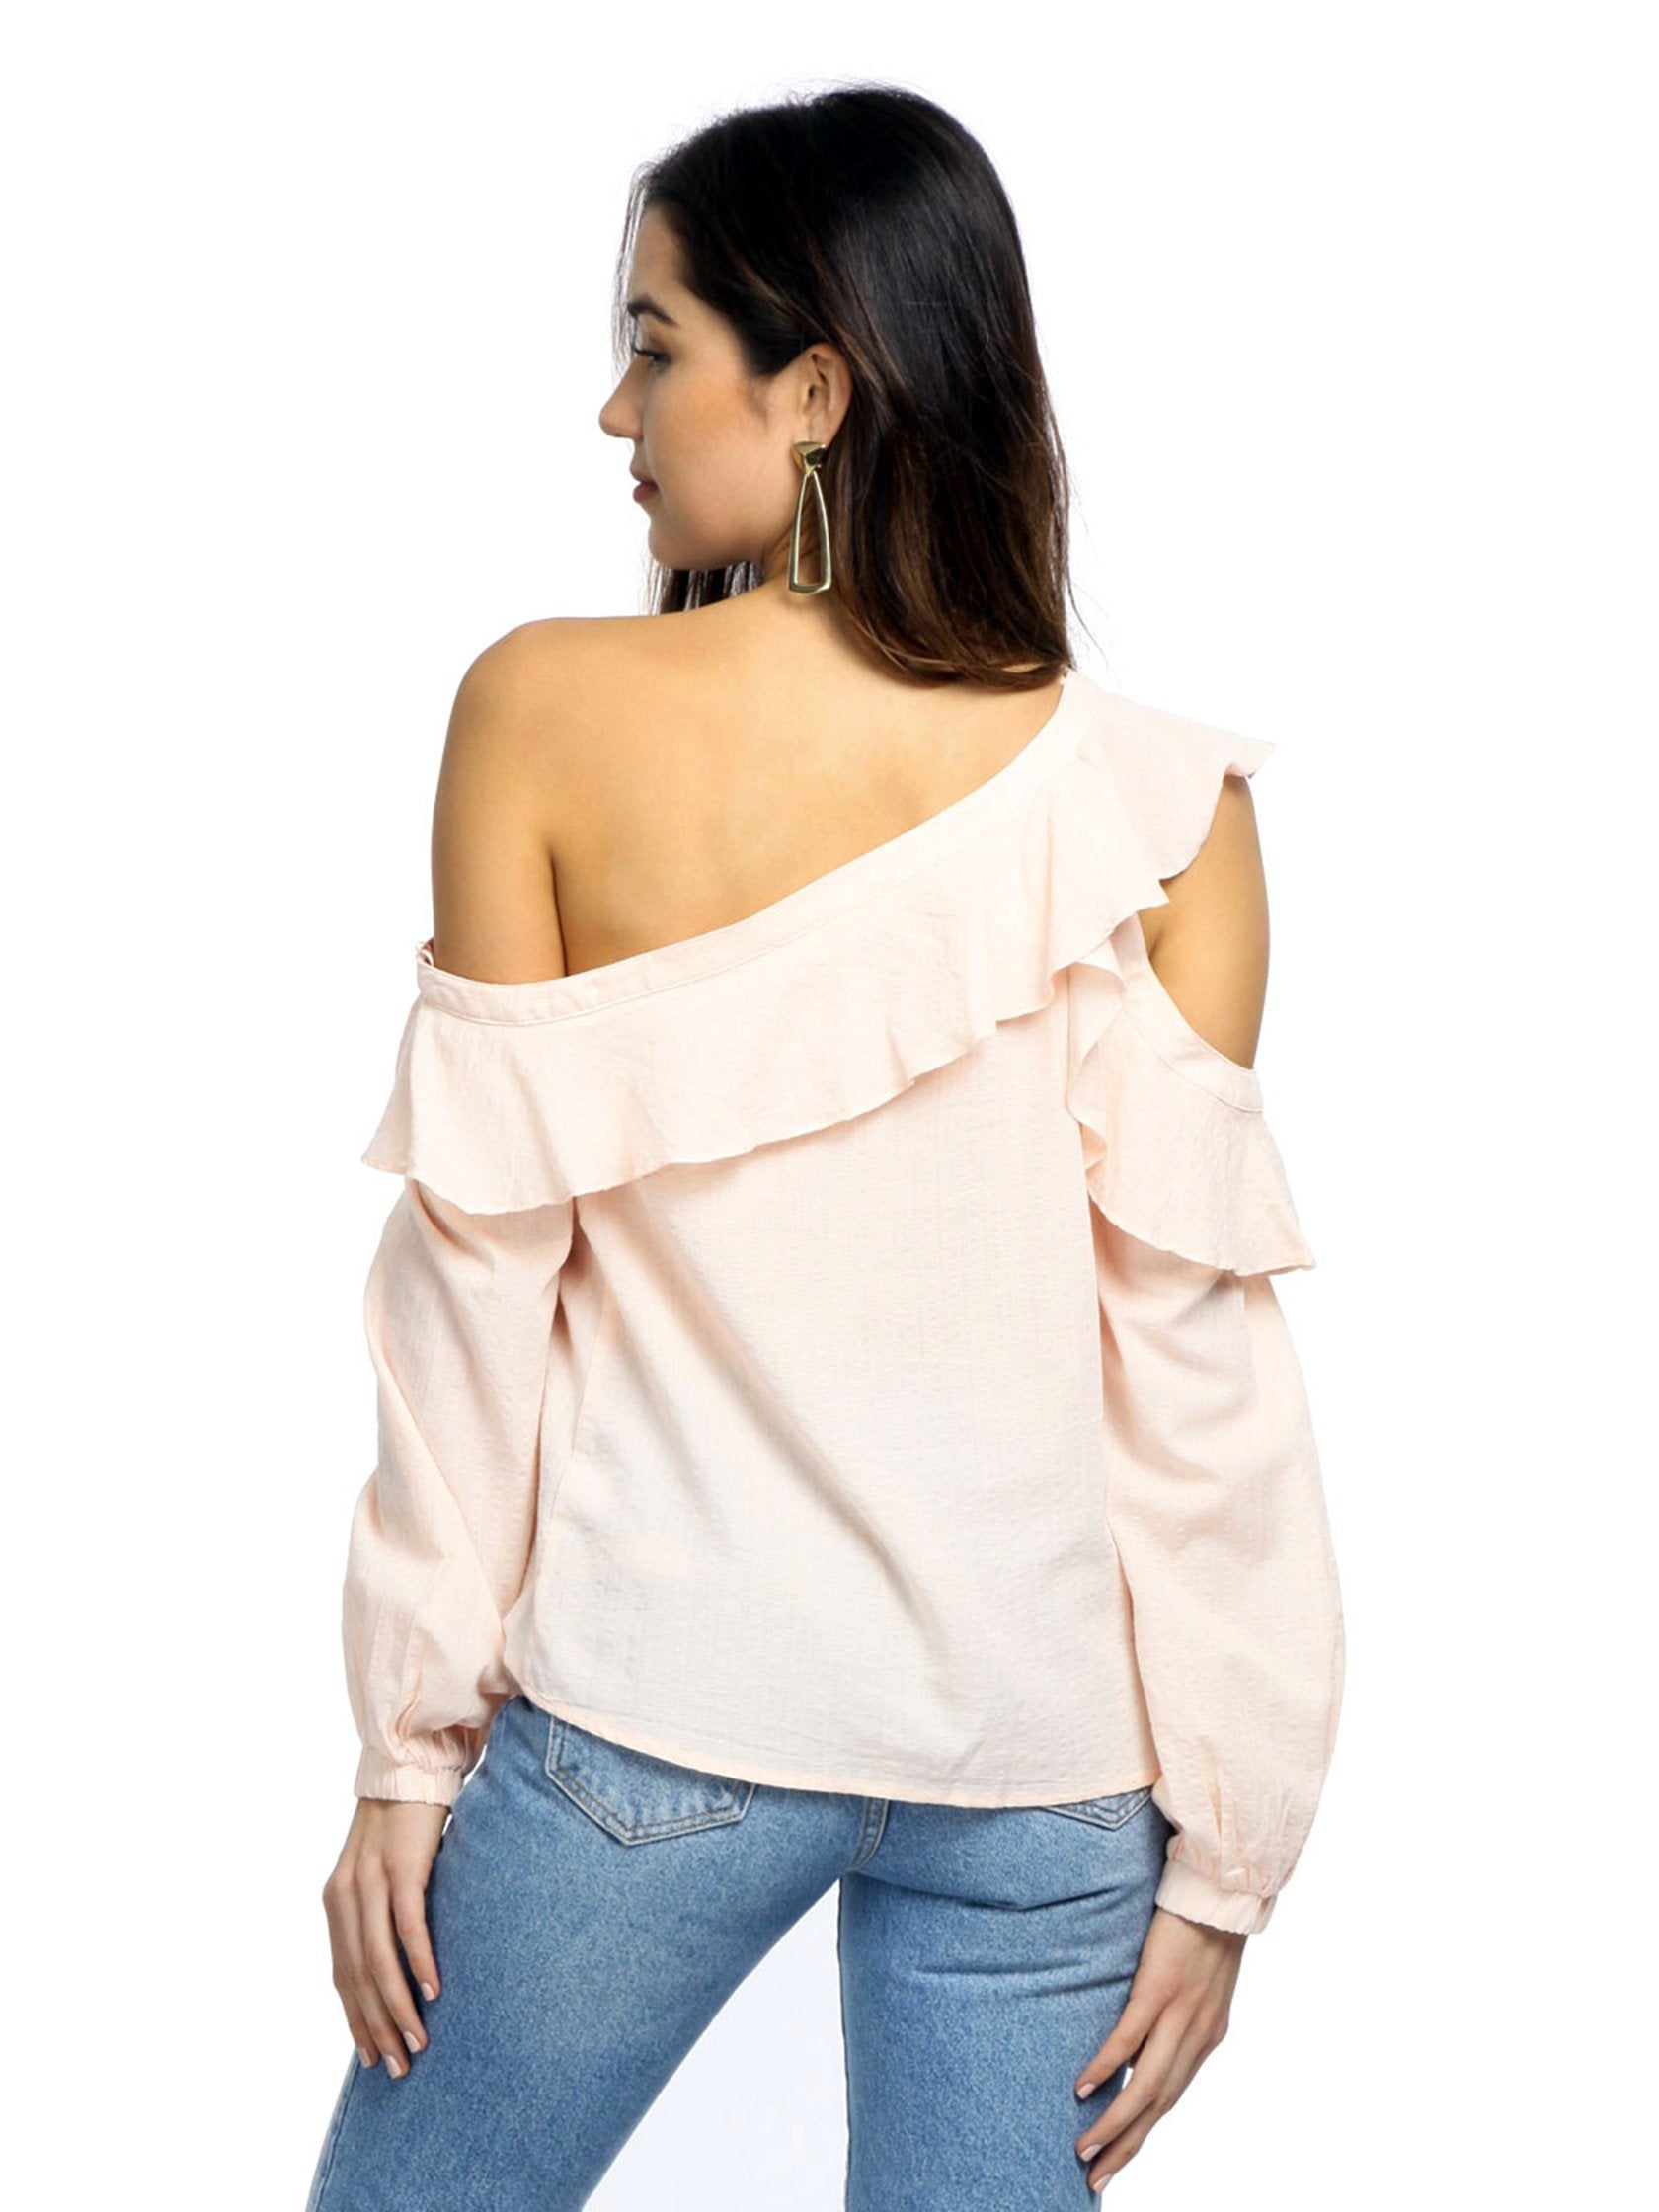 Girl wearing a top rental from ASTR called Paige Off The Shoulder Blouse